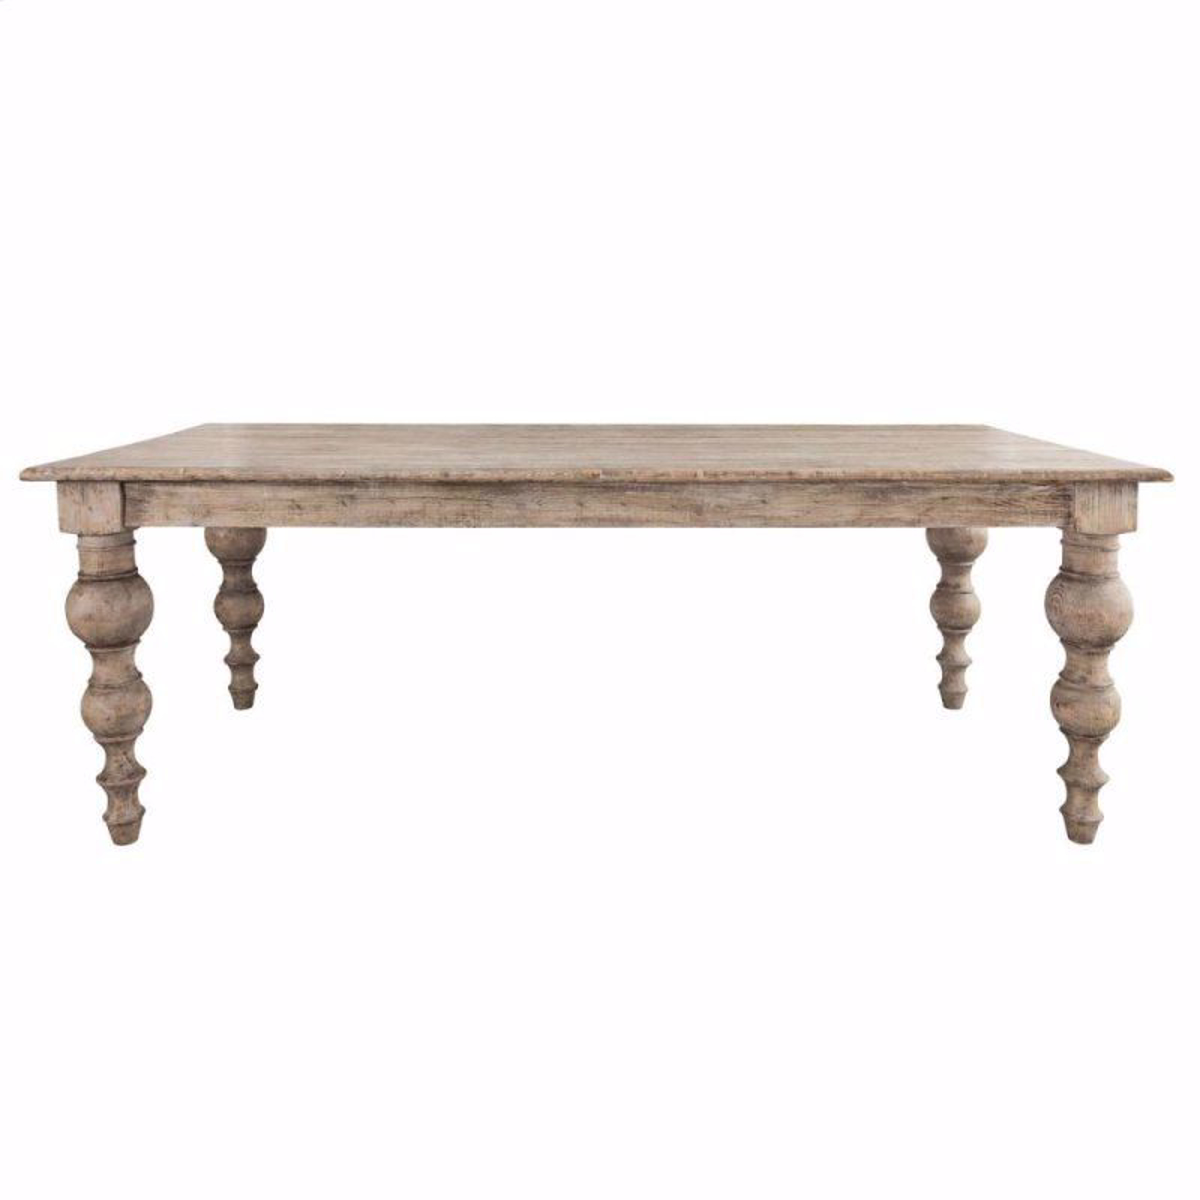 Picture of Bordeaux Dining Table